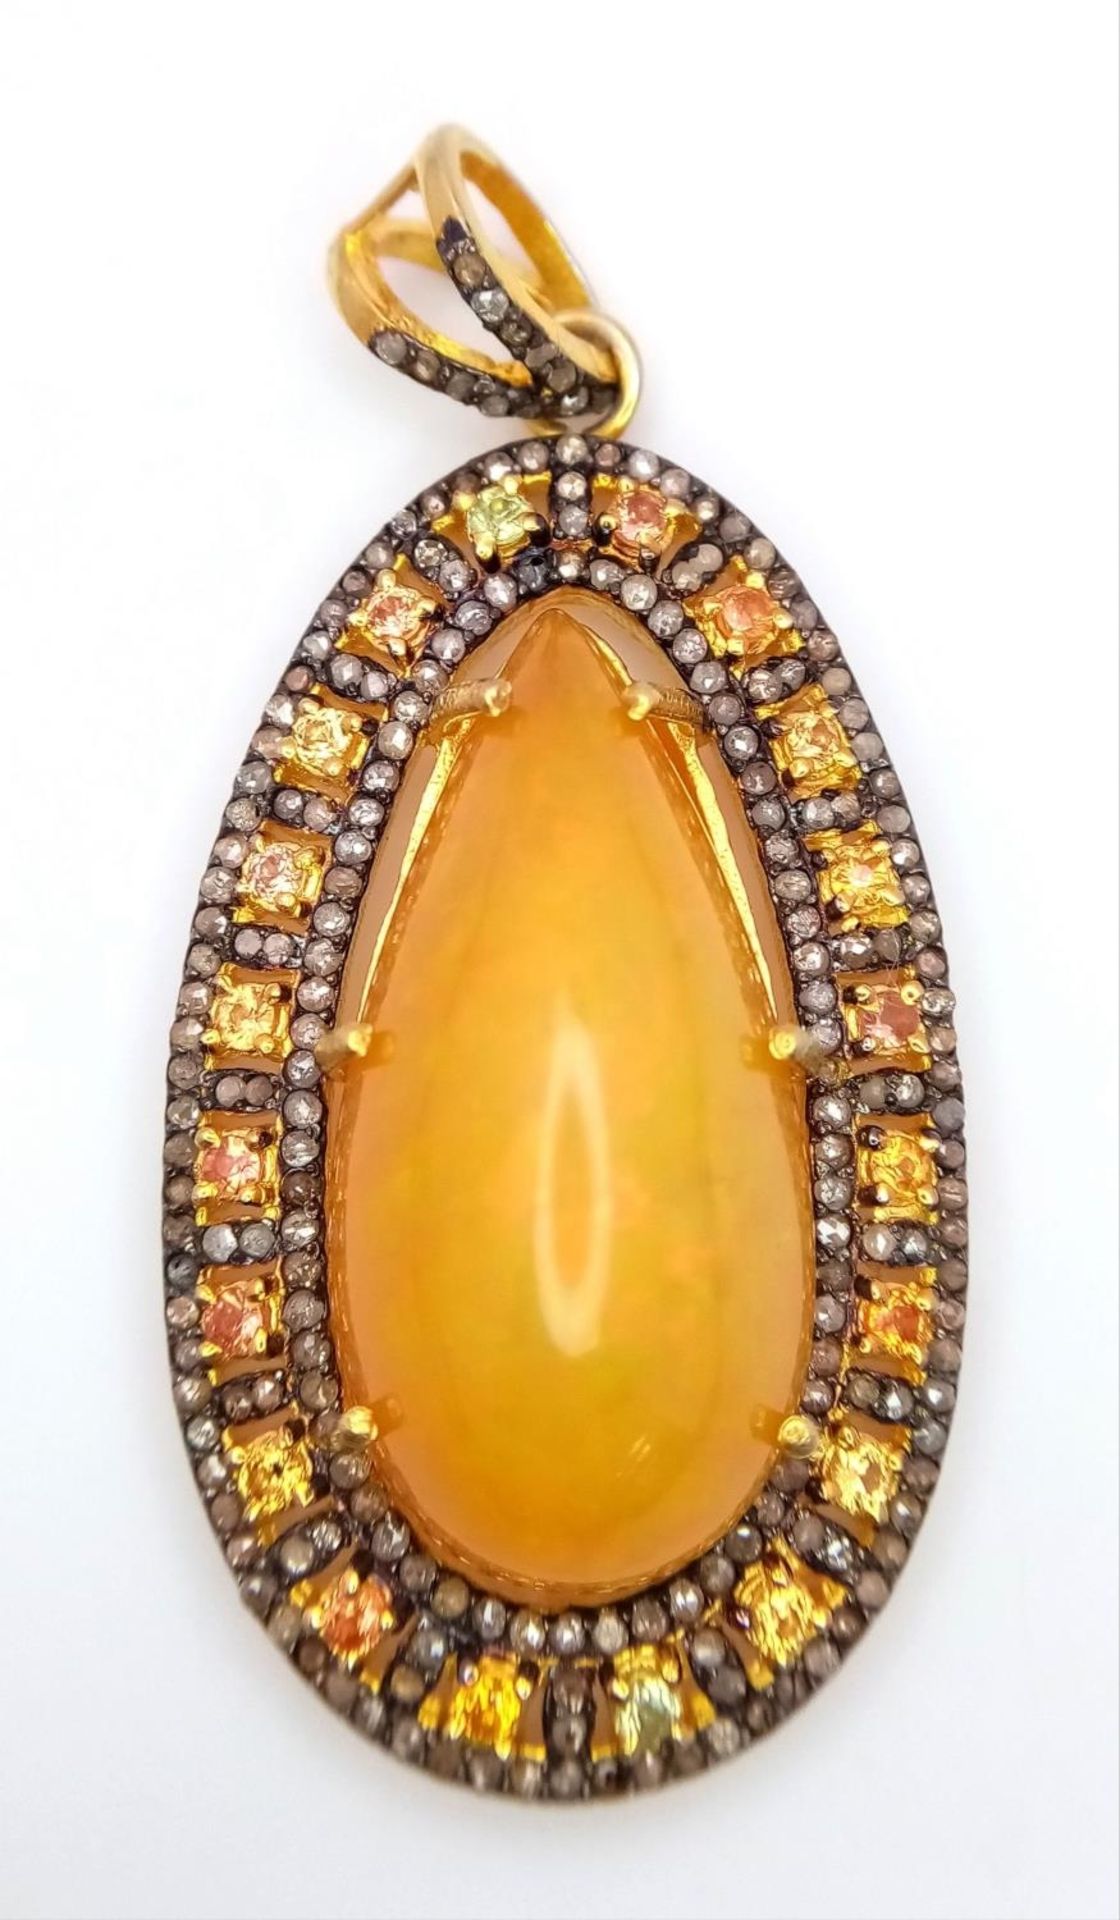 An Australian Fire Opal Pendant with Yellow Sapphires and Old Cut Diamond Surround set in Gilded 925